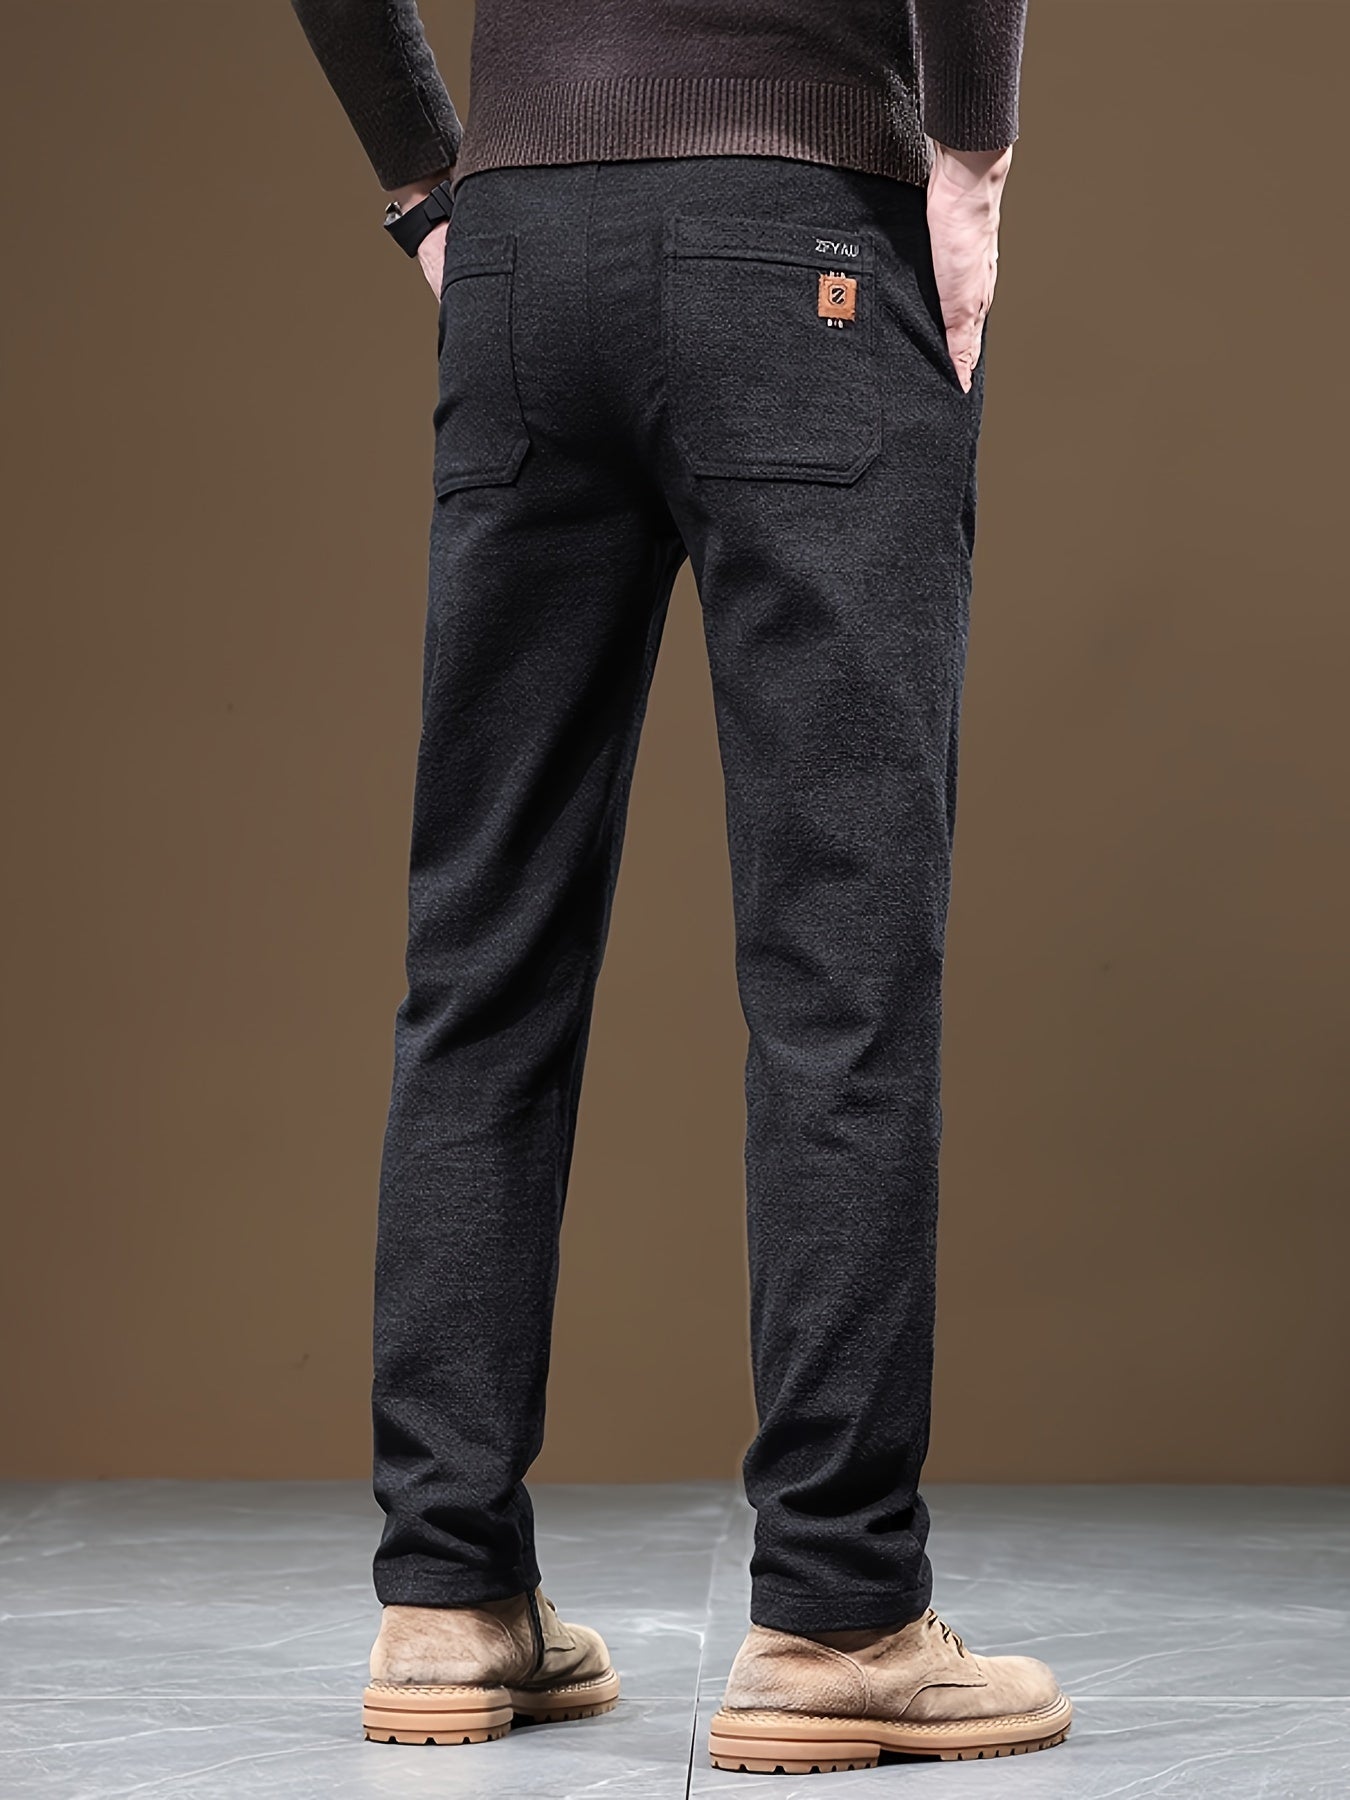 Men's Casual Warm Slim Fit Trousers, Semi-Formal cropped Pants For Fall Winter Business Leisure Activities